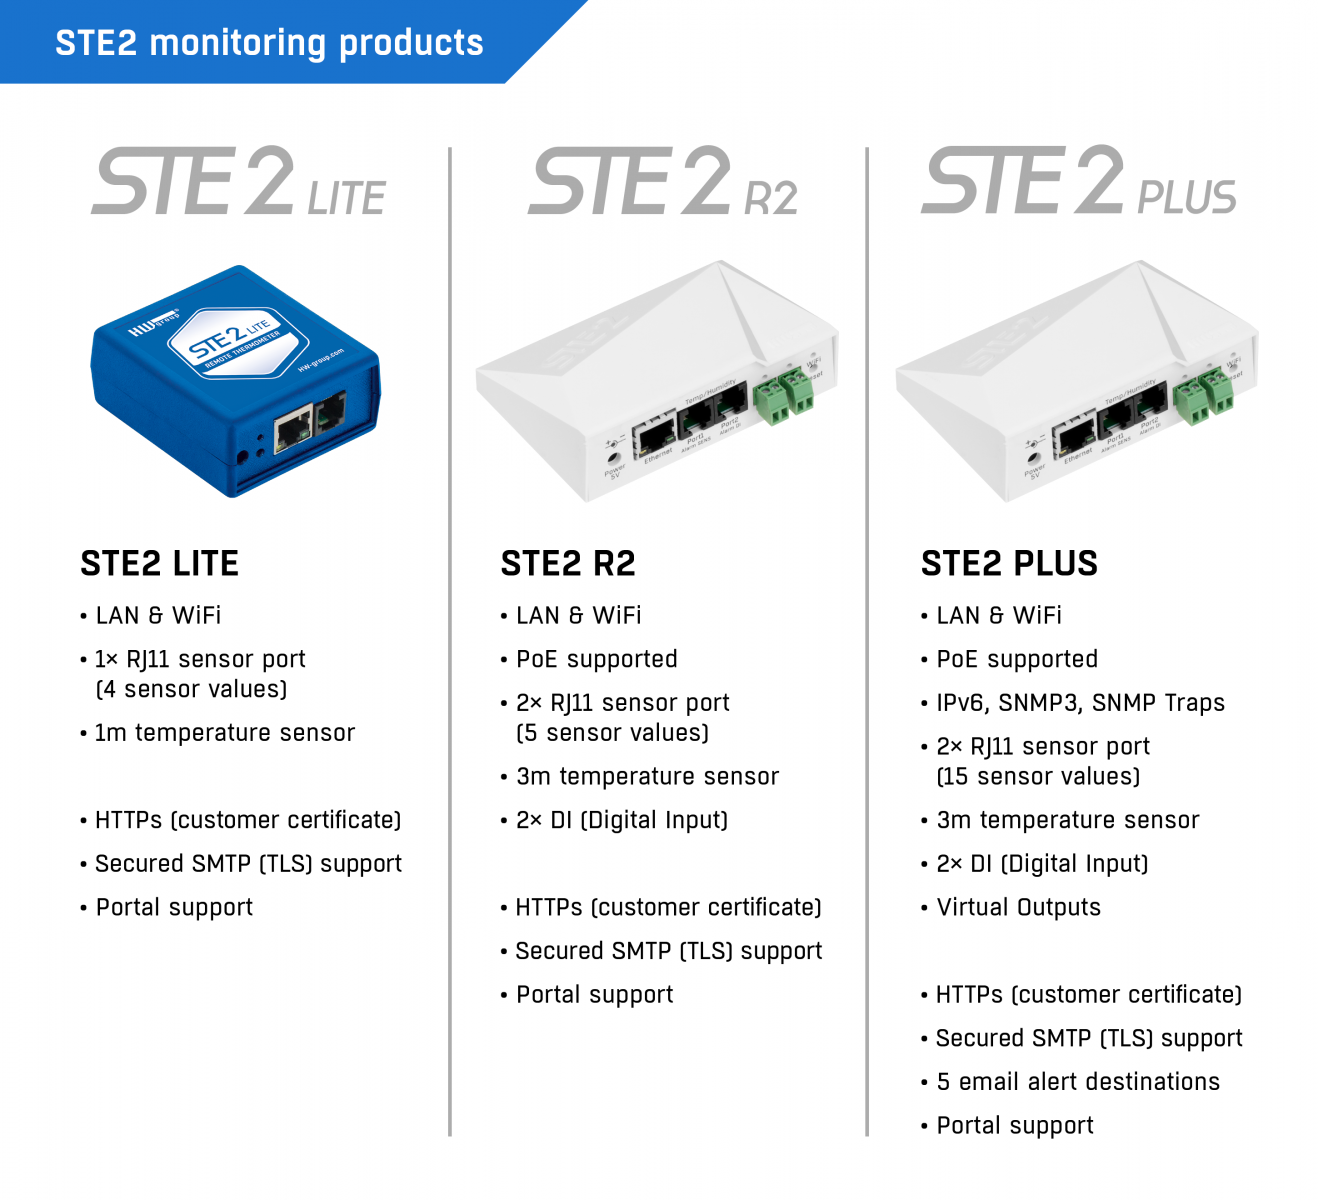 https://www.hw-group.com/files/styles/large/public/gallery/10130-ste2-r2/ste2monitoringproducts-comparisonnew.png